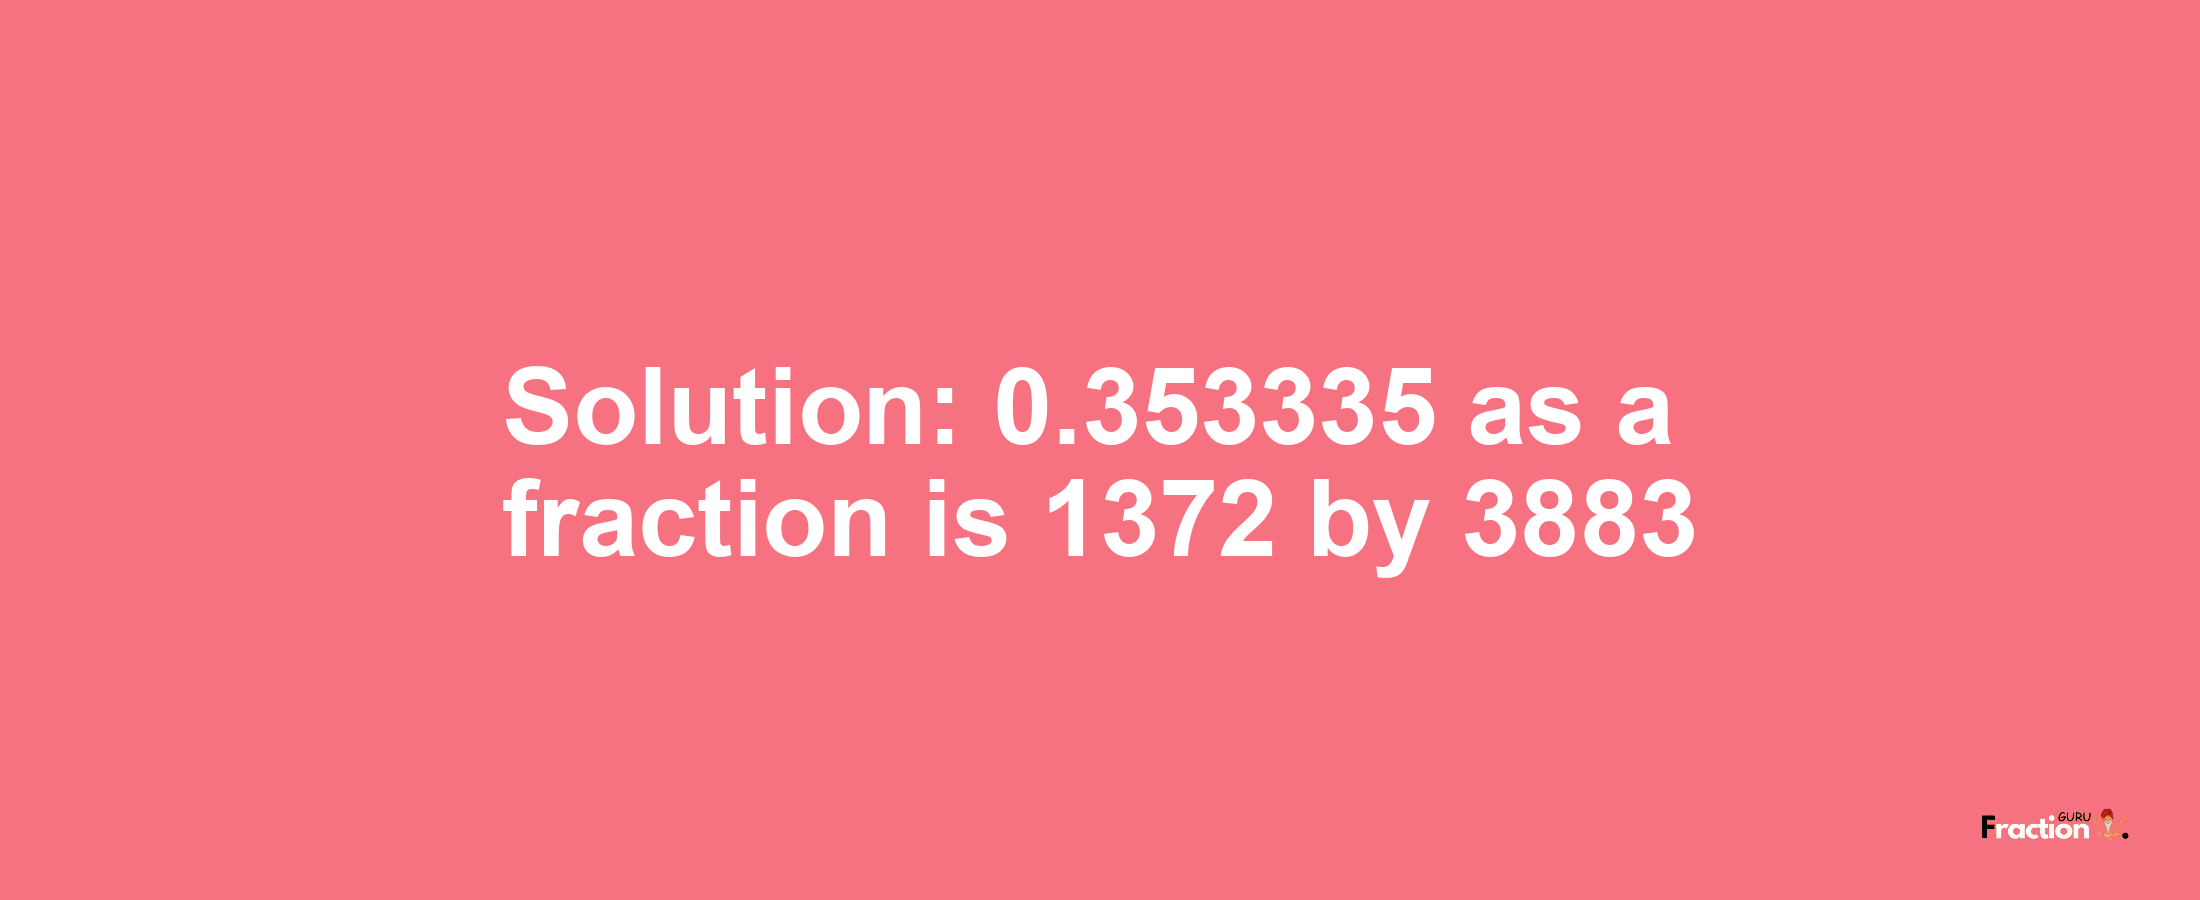 Solution:0.353335 as a fraction is 1372/3883